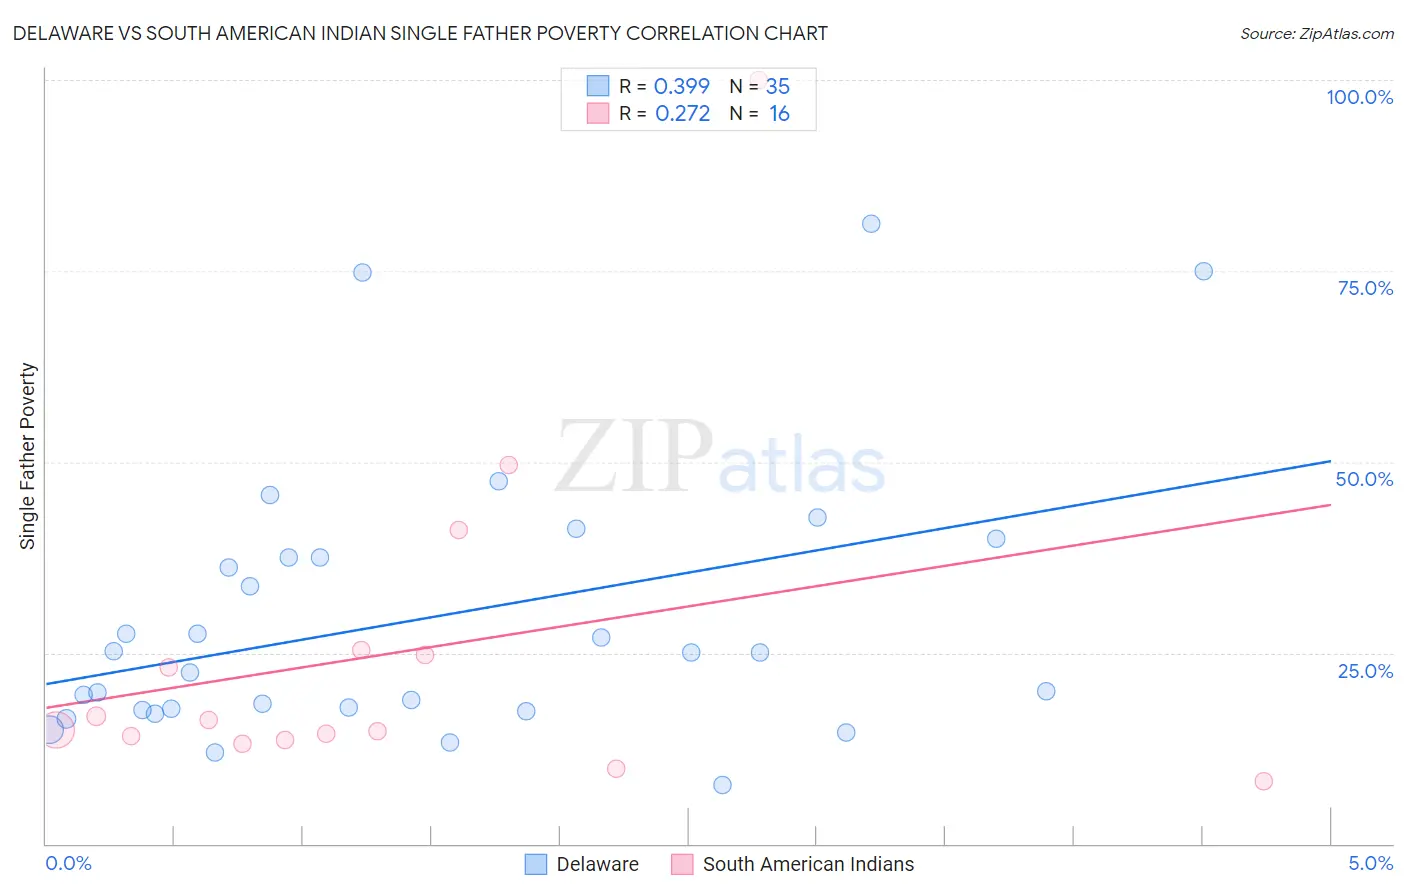 Delaware vs South American Indian Single Father Poverty